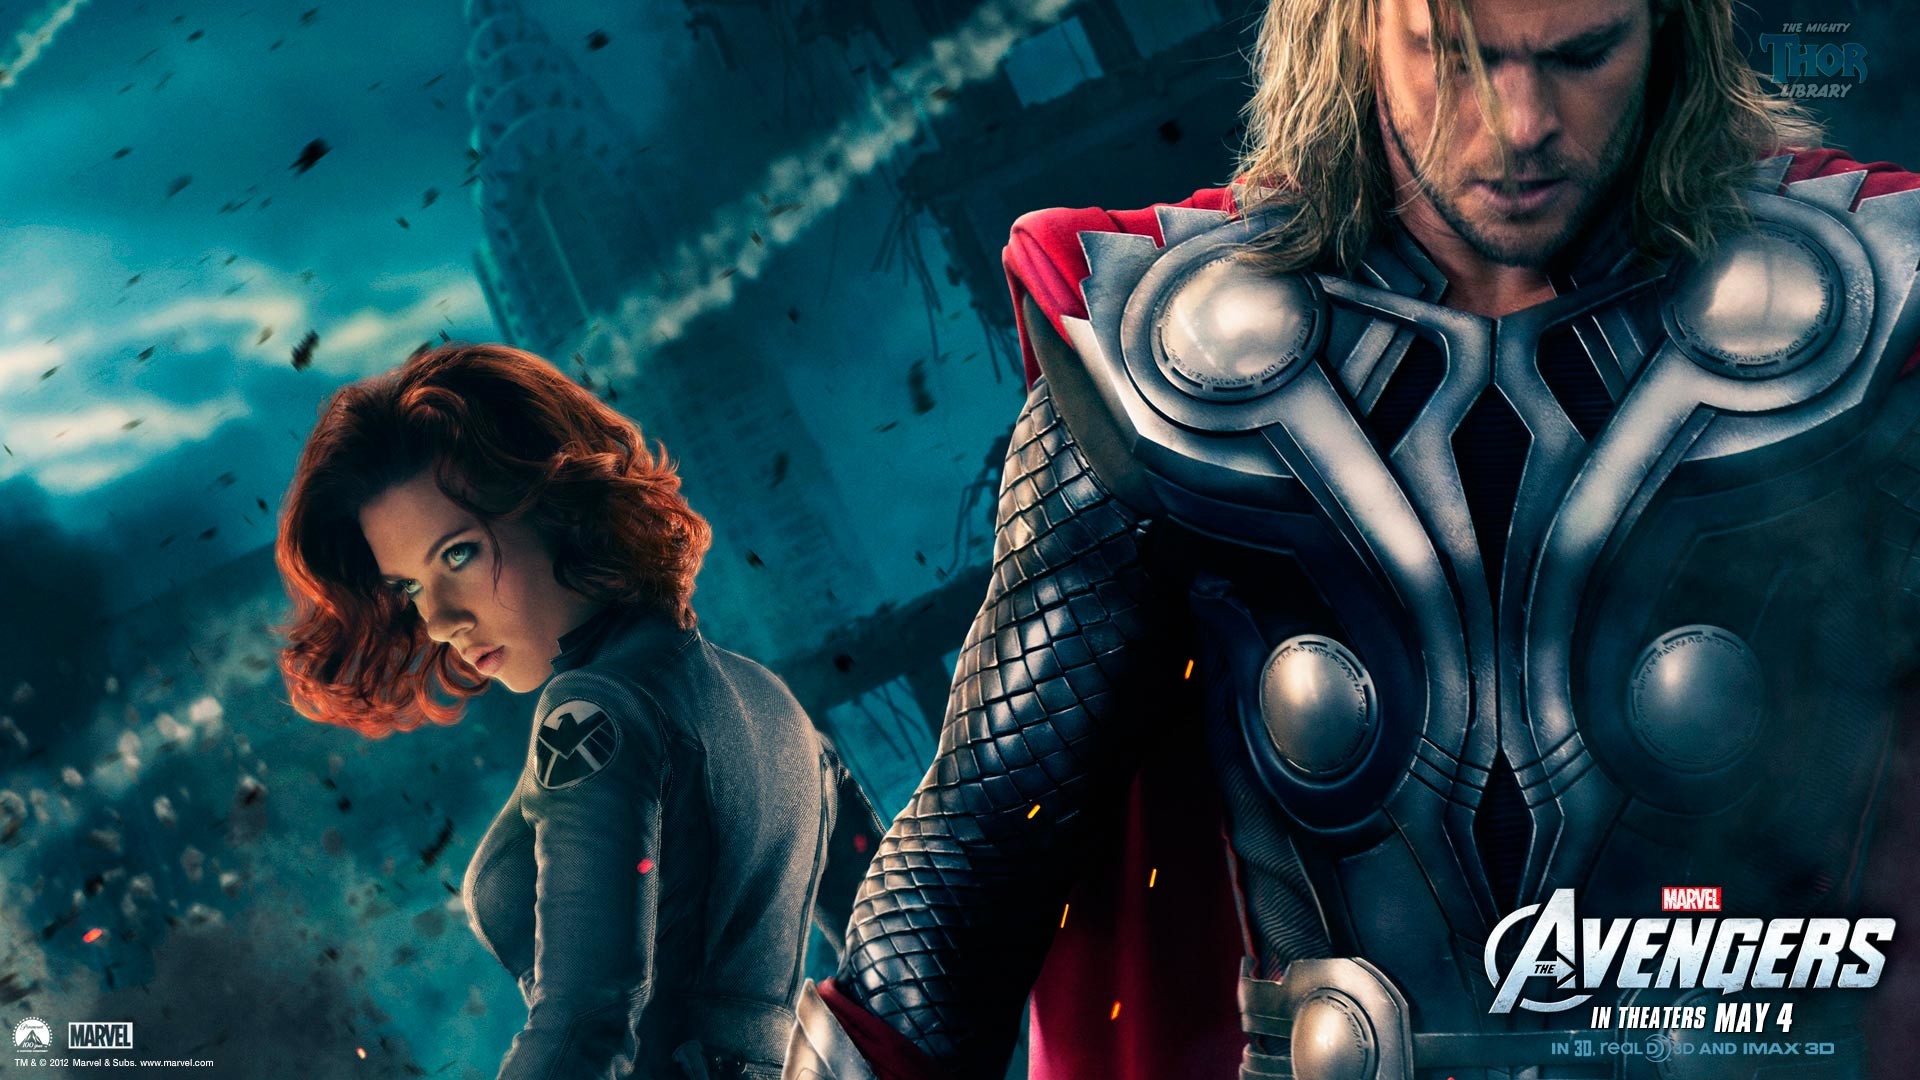 1920x1080 Thor and Black Widow from the Avengers movie (1920 x 1080) wallpaper